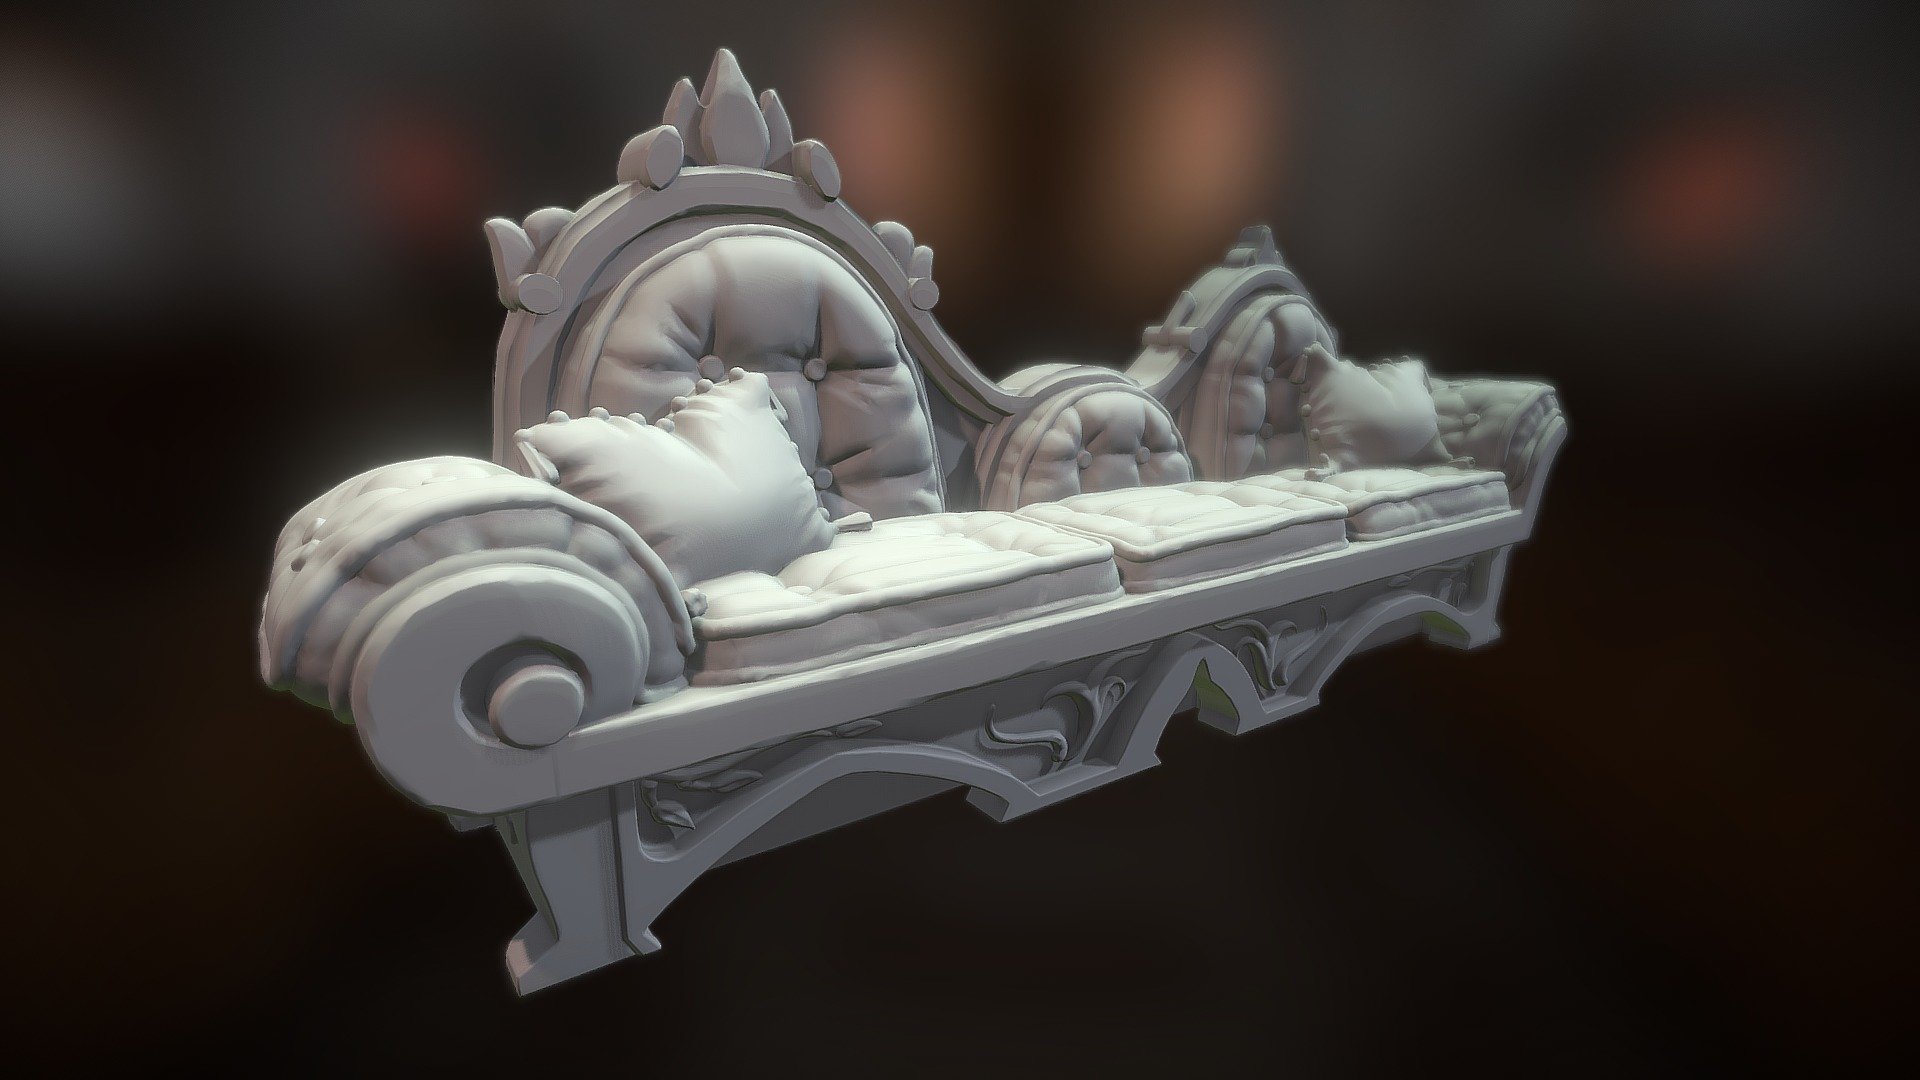 Miniature 3D printable lounge bed/chez lounge for D&amp;D and tabletop games!

File available for purchase in a 3D-Printable set from Infinite Dimensions Games:
https://www.infinitedimensions.ca/product/3d-printable-noblemans-furnishings/ - Miniature 3D Printable Chez Lounge Bed - 3D model by Rita Puhakka (@RitaPuhakka) 3d model